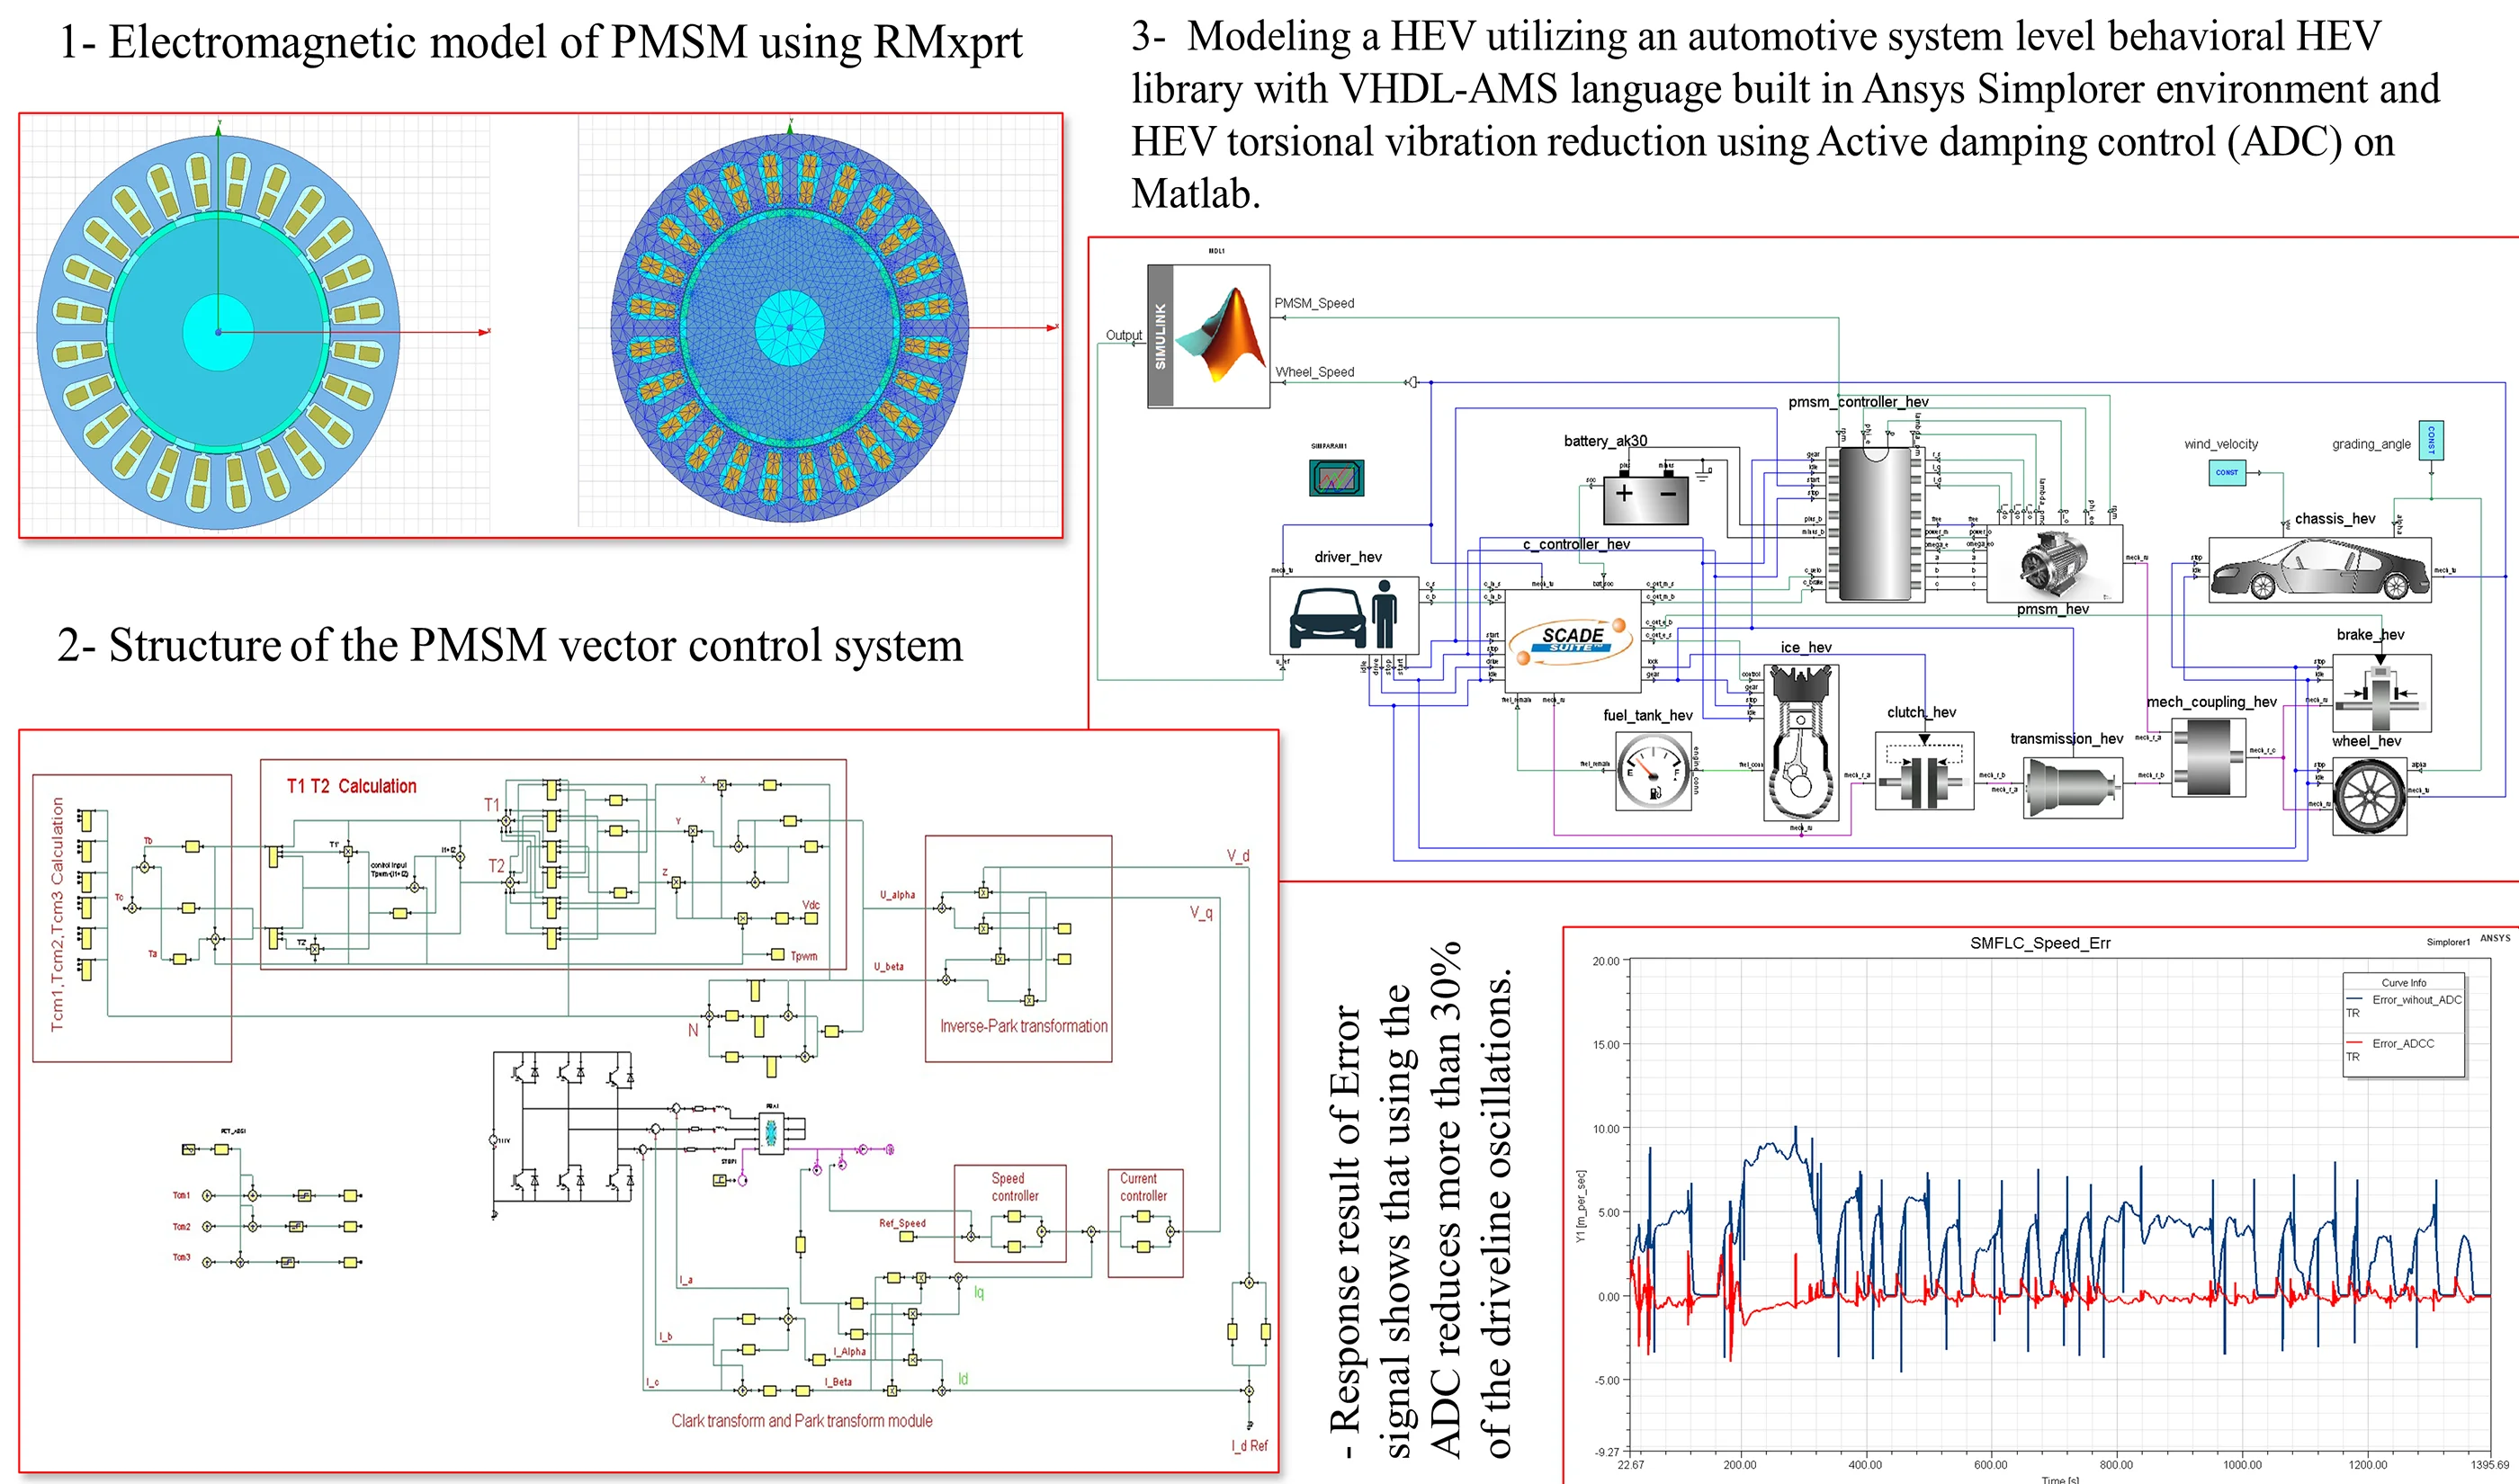 Active damping control of HEVs using Ansys and Matlab/Simulink software